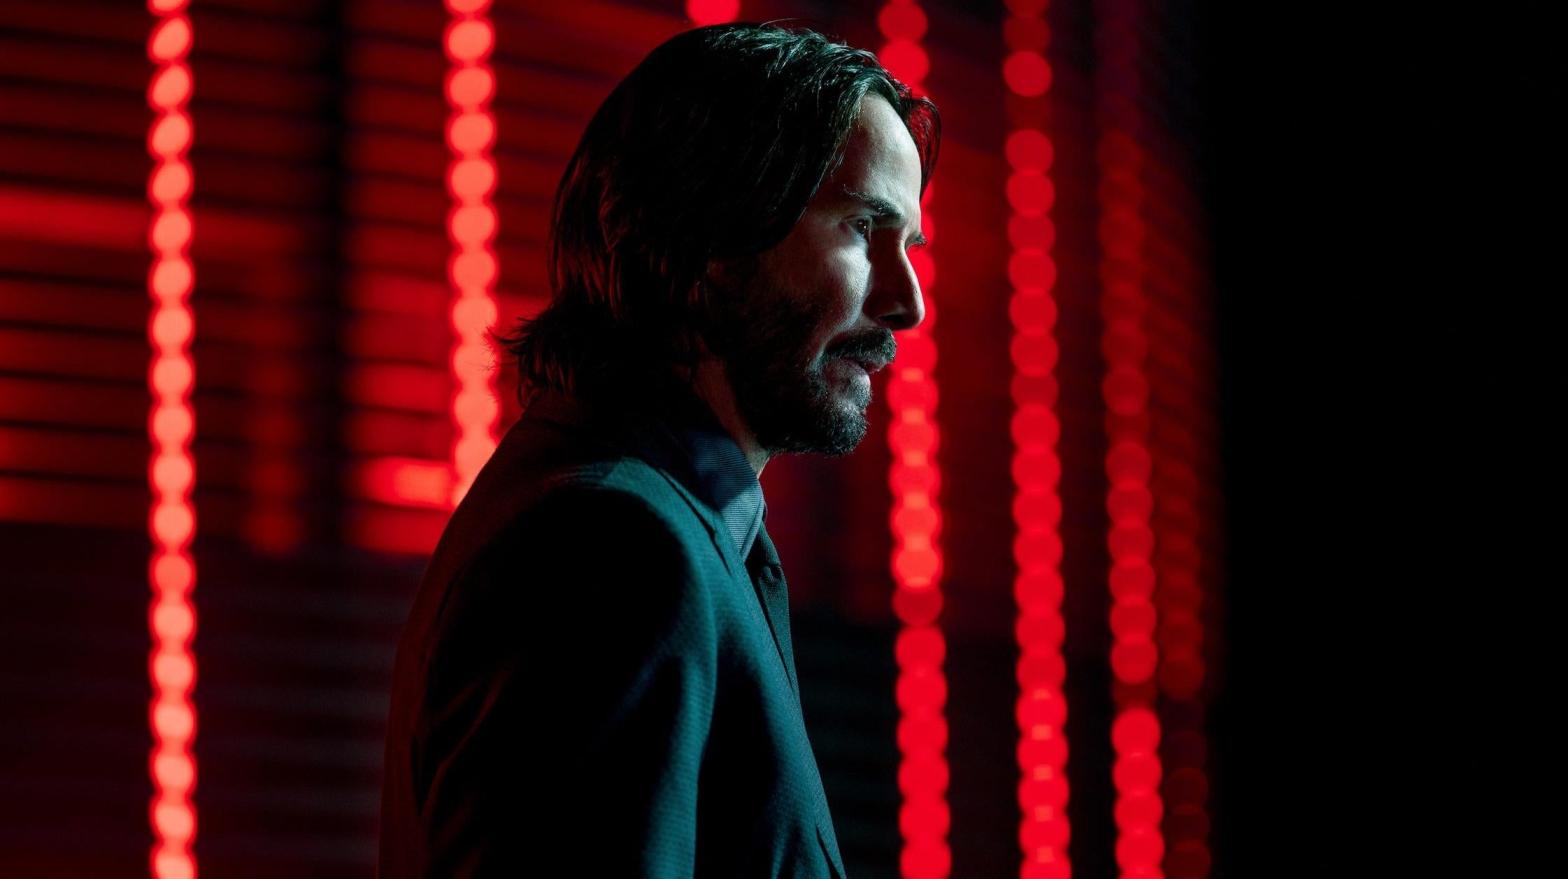 John Wick is the one of very few non-horror or animated franchises tearing up the box office these days. (Image: Lionsgate)